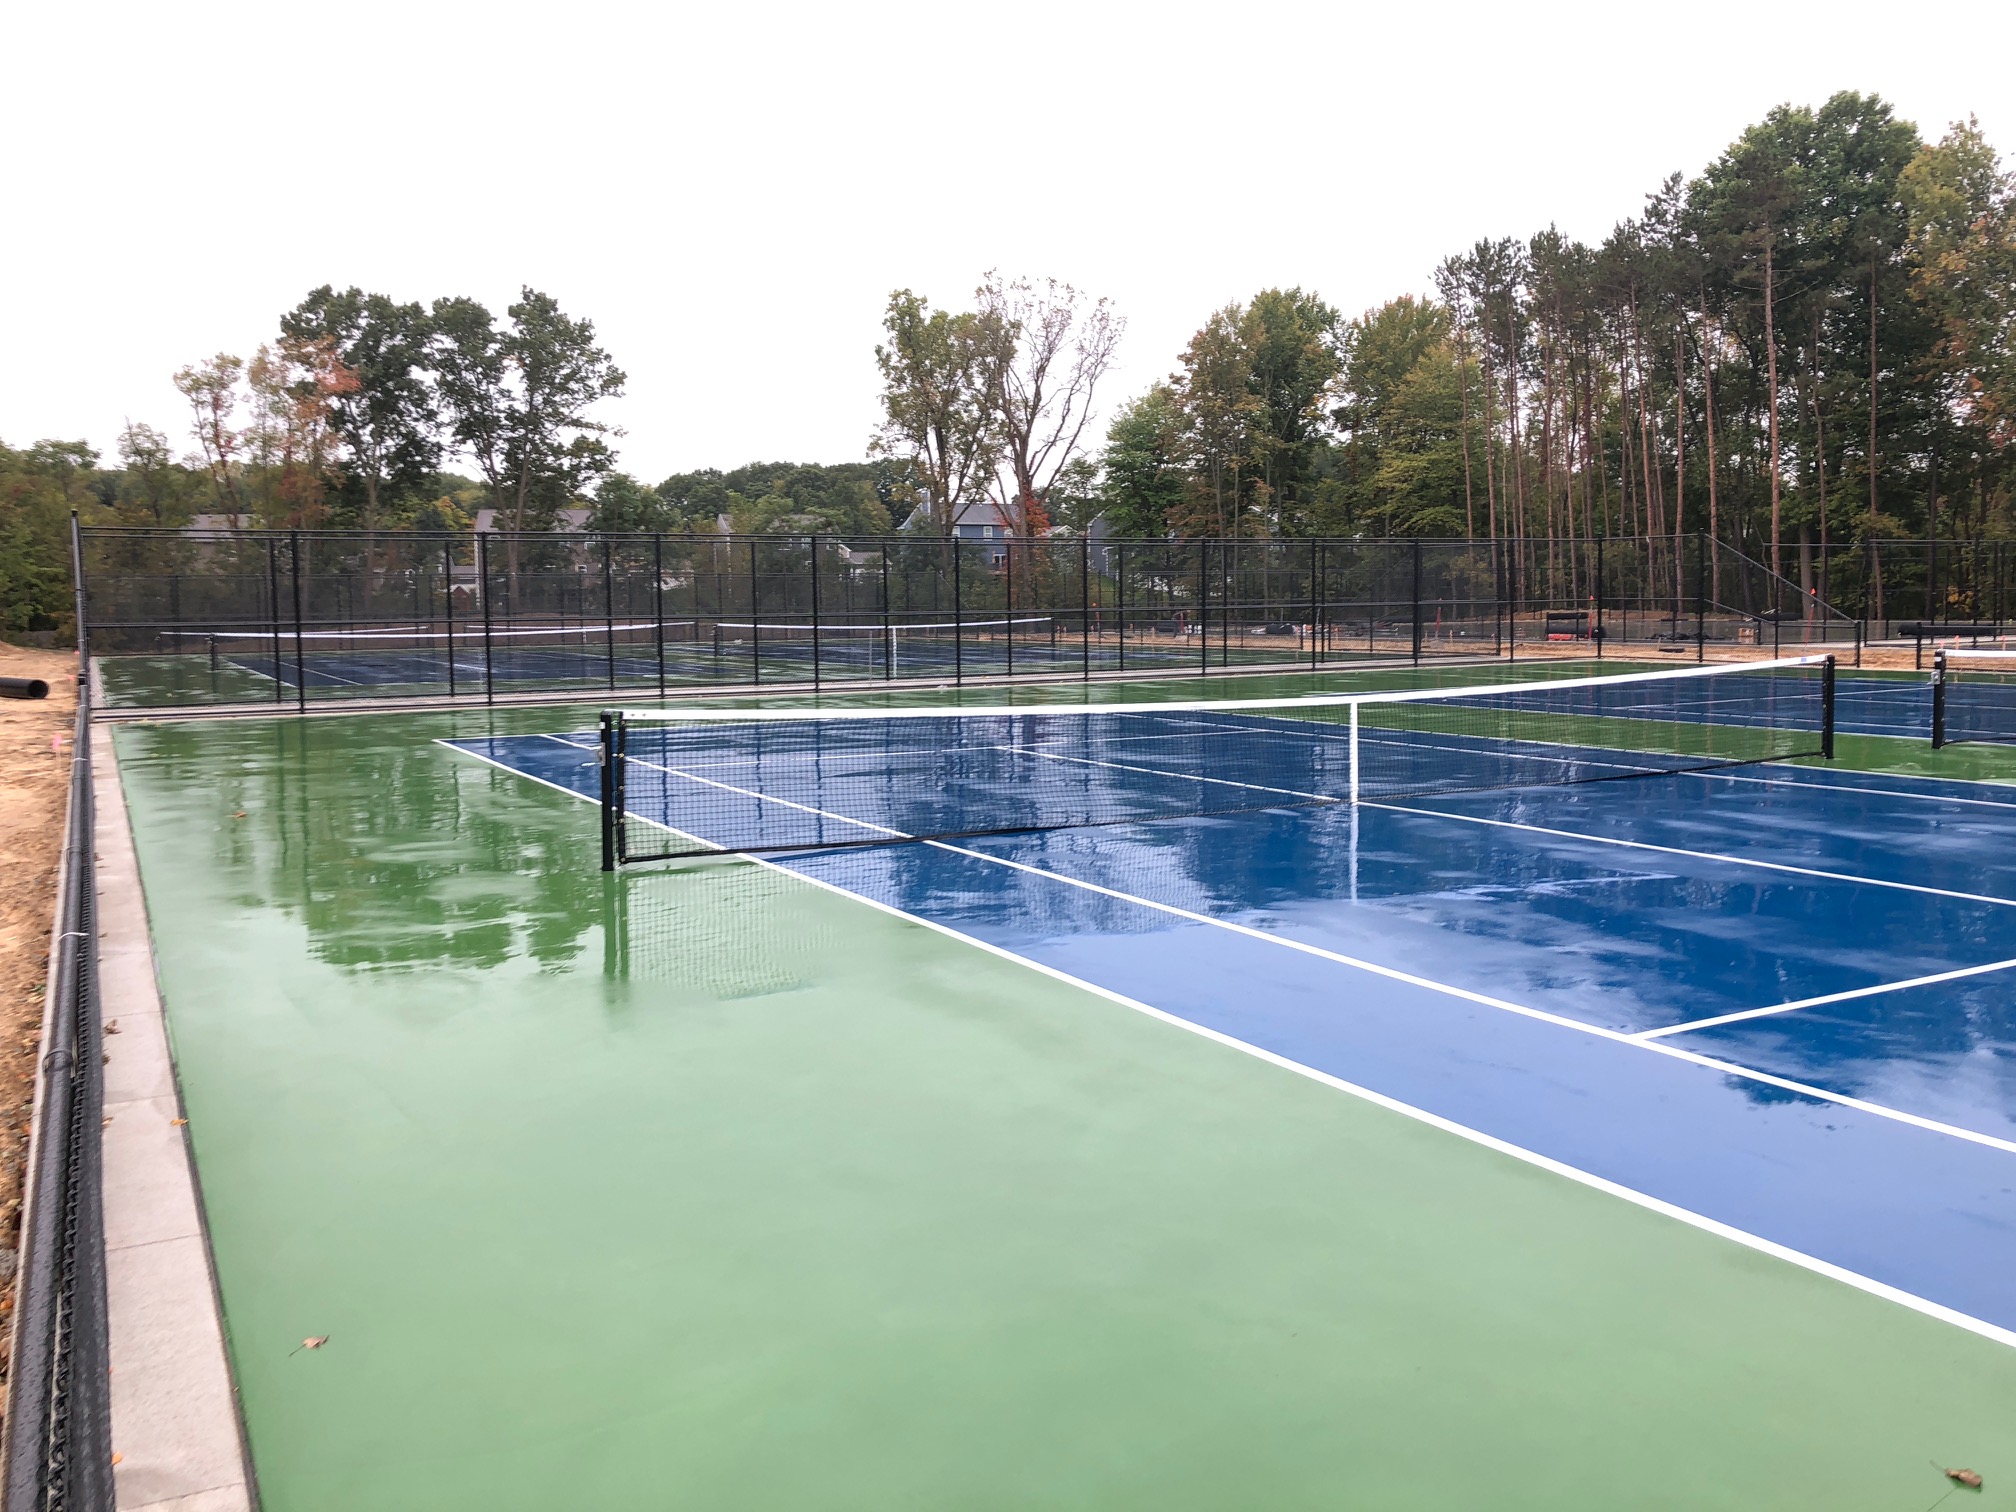 new tennis courts with paint and nets